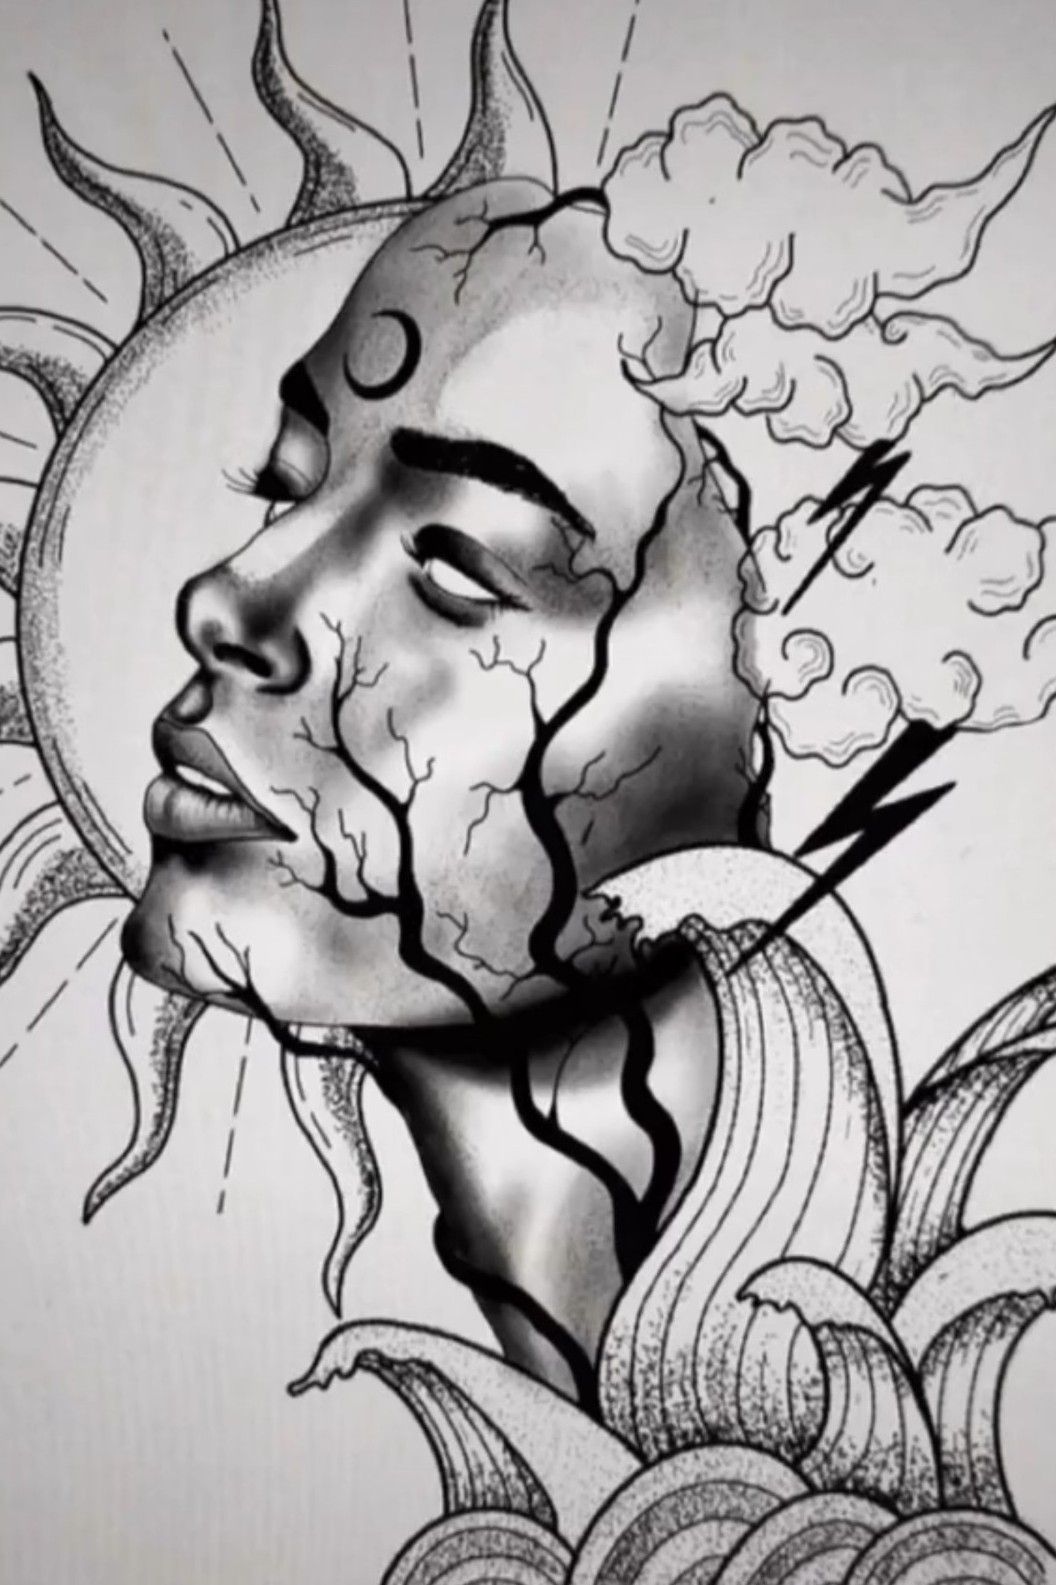 Bring the Sun to Life with Stunning Sun Drawings